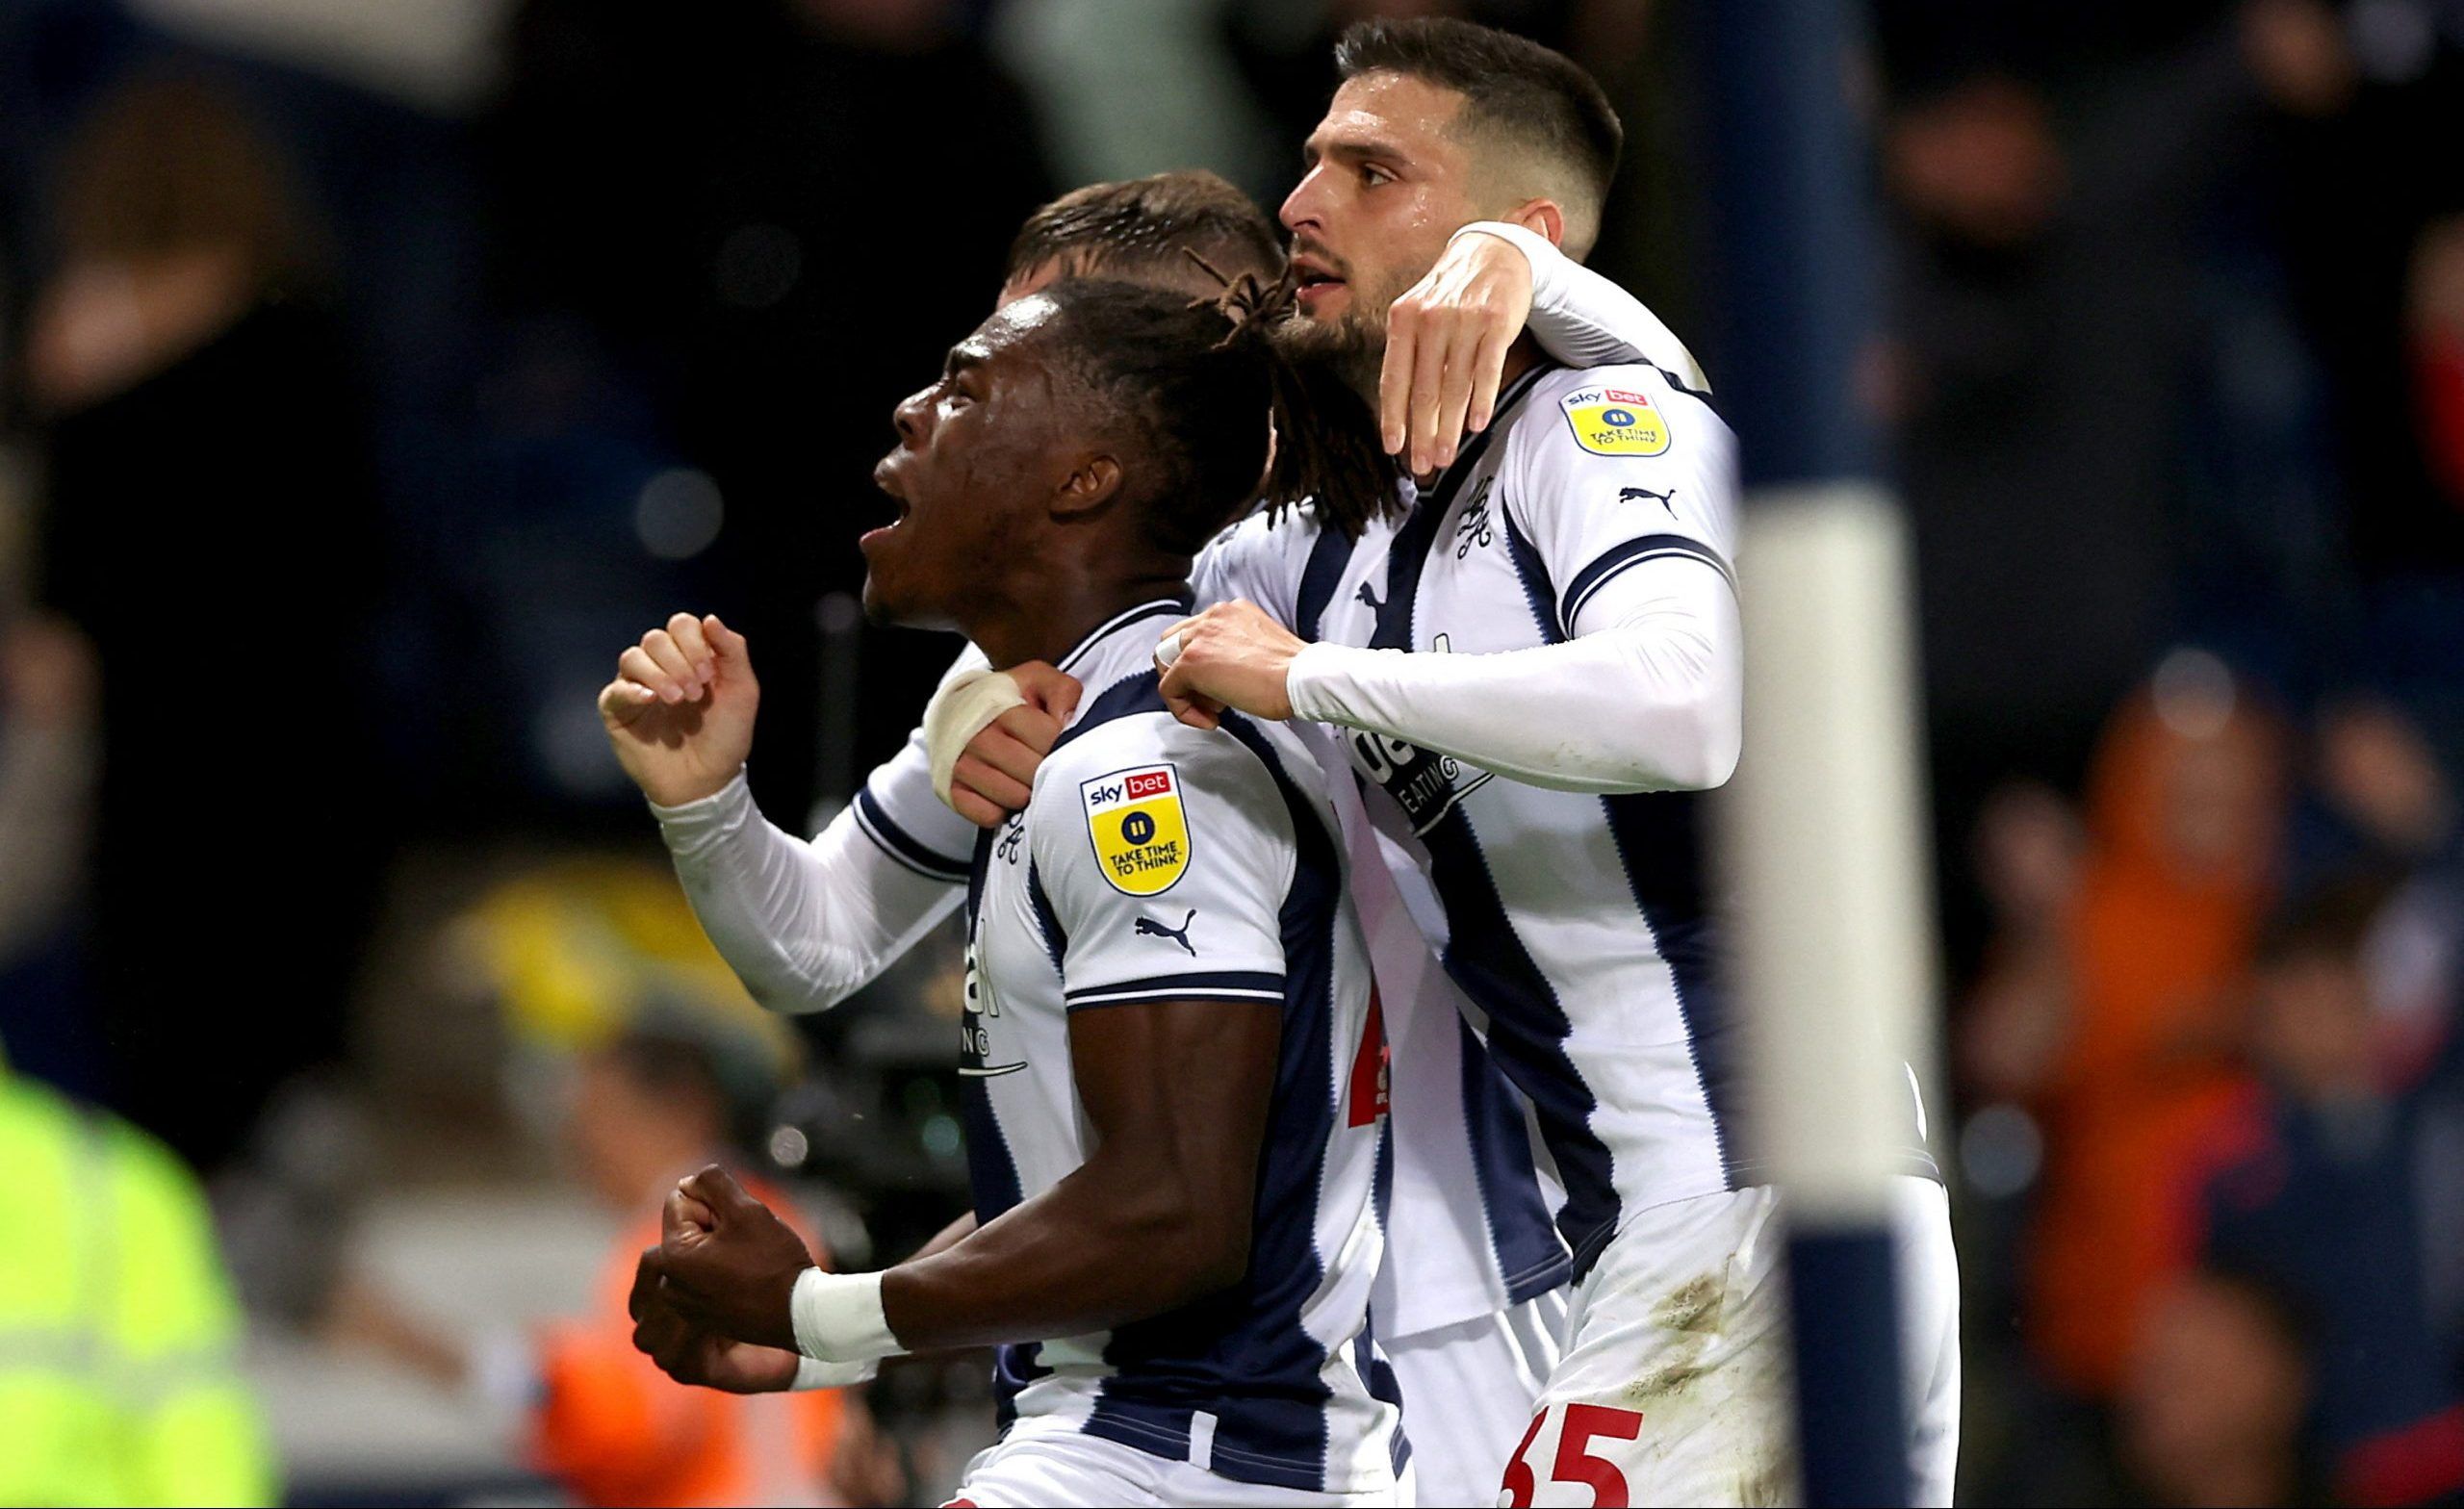 Soccer Football - Championship - West Bromwich Albion v Burnley - The Hawthorns, West Bromwich, Britain - September 2, 2022 West Bromwich Albion's Brandon Thomas Asante celebrates scoring their first goal  Action Images/Matthew Childs  EDITORIAL USE ONLY. No use with unauthorized audio, video, data, fixture lists, club/league logos or 